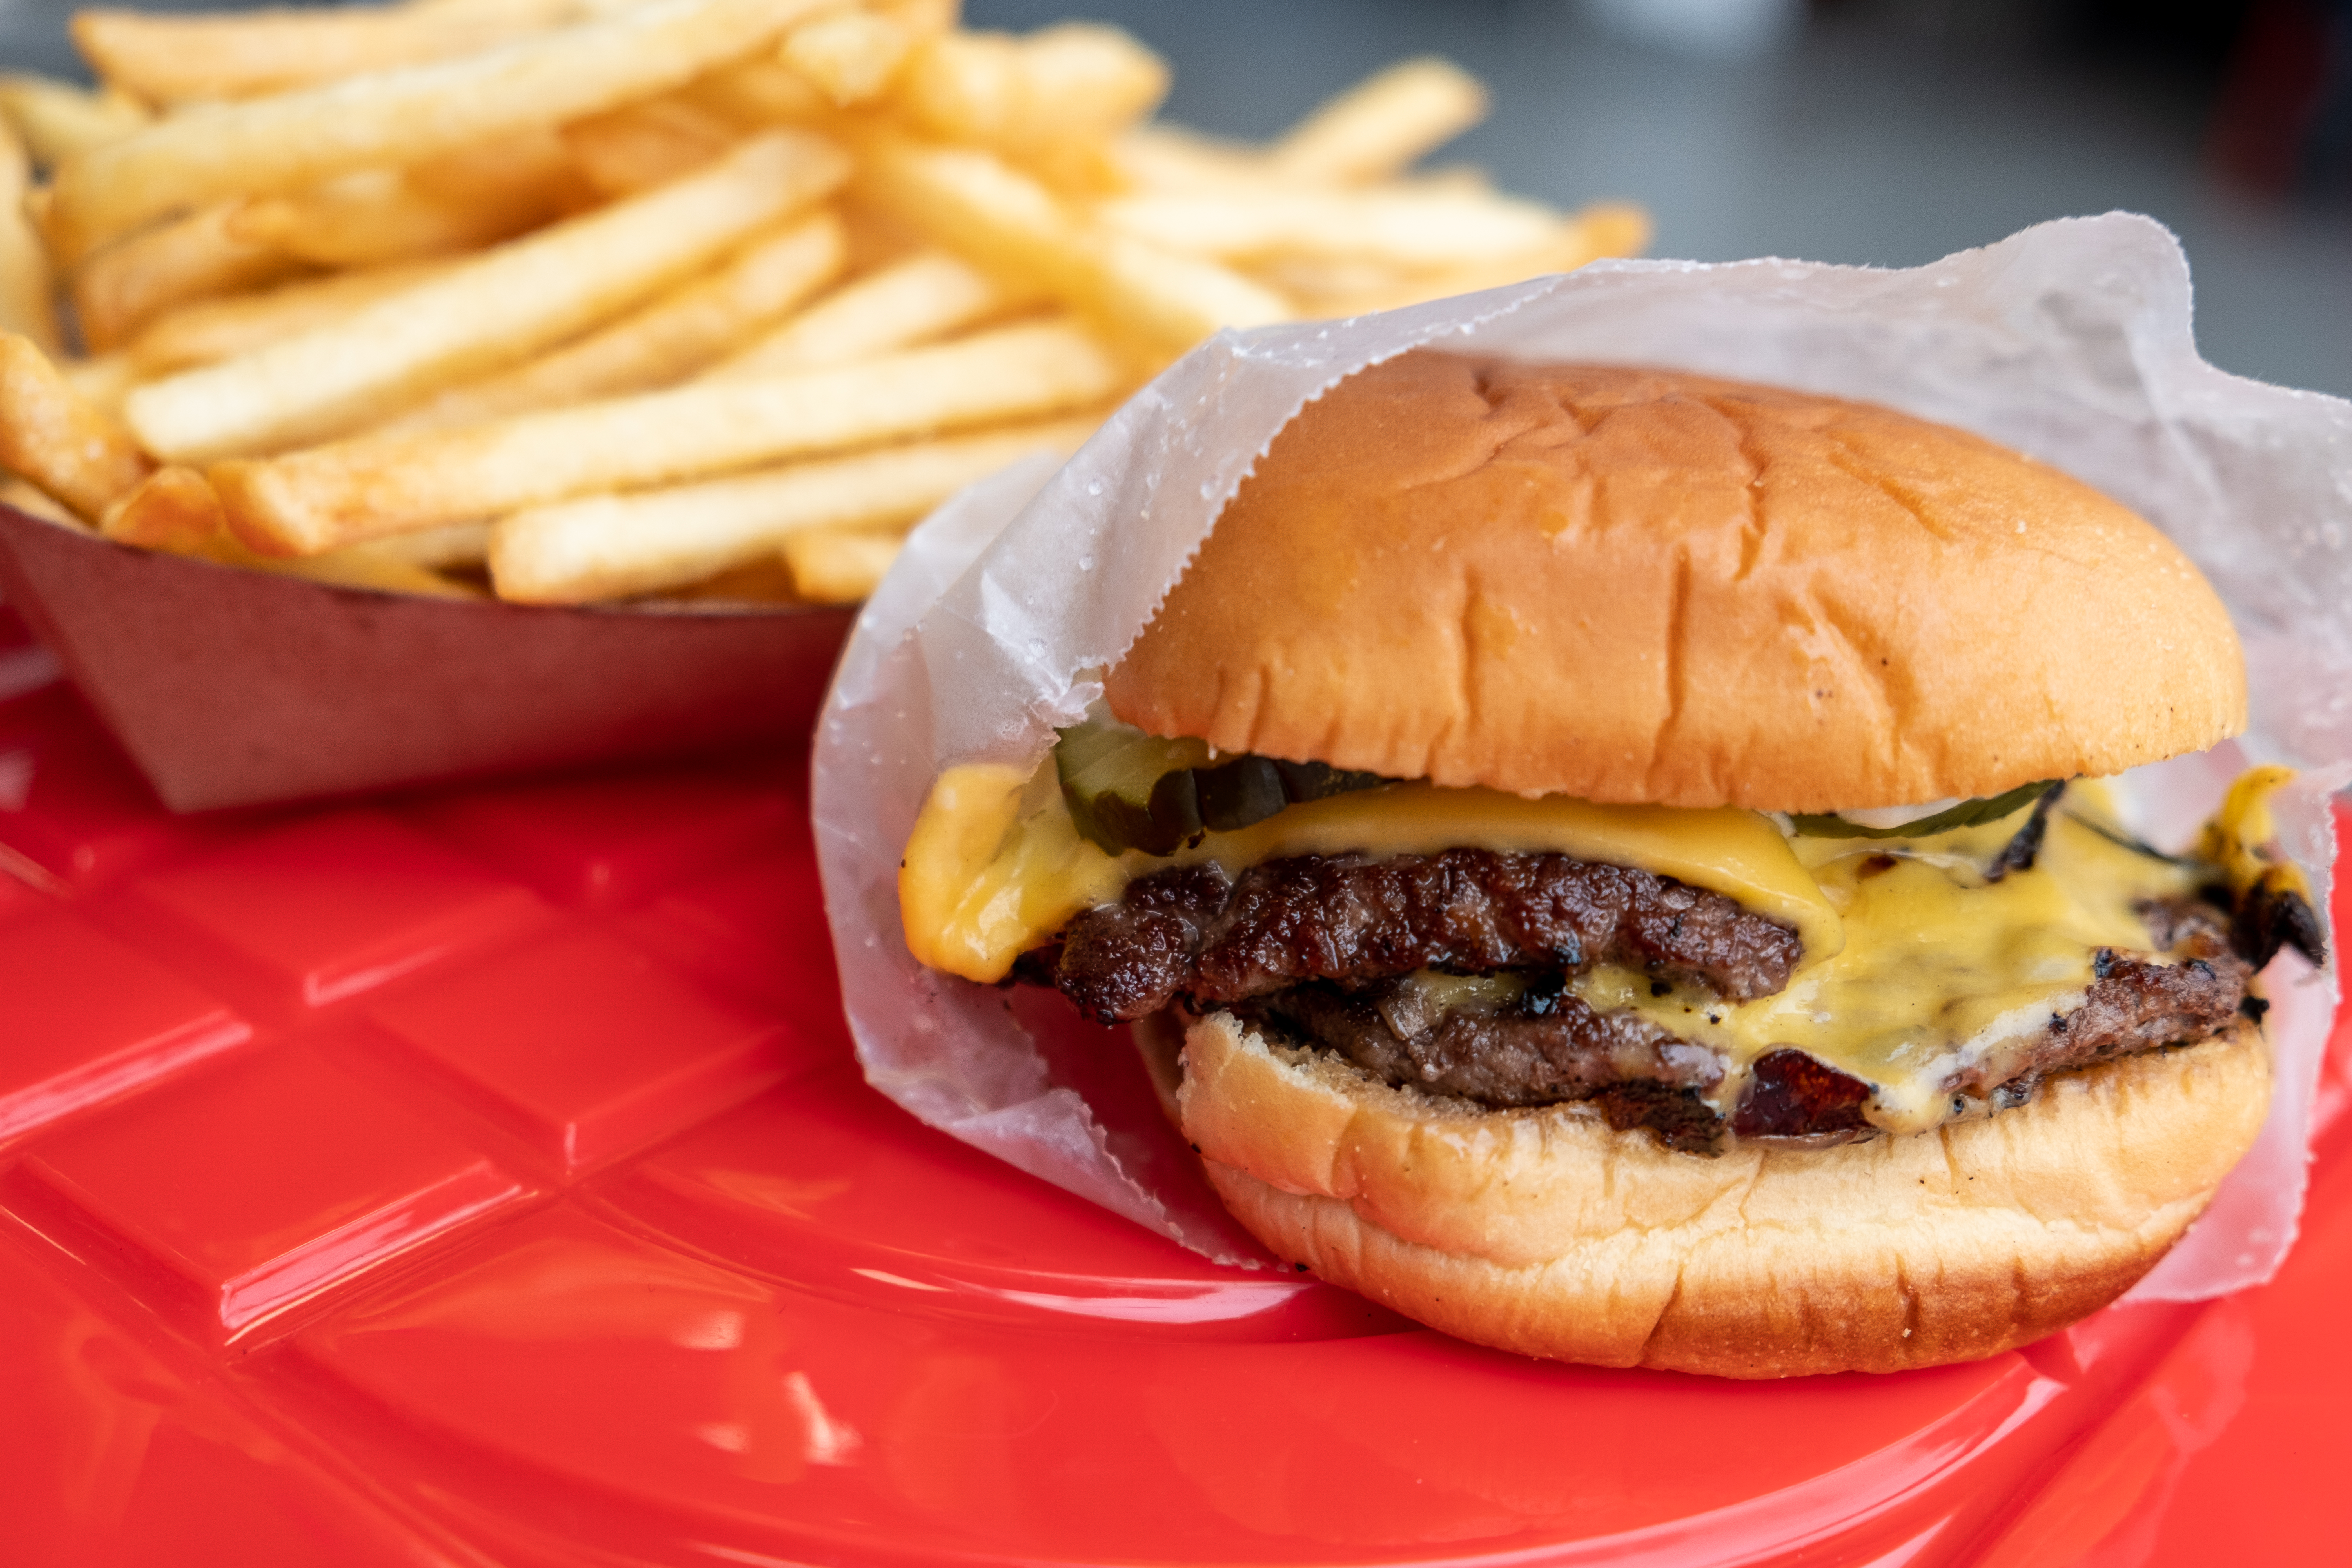 A double patty cheeseburger and fries sit on a red plastic stool in front of a restaurant. shown from up close.